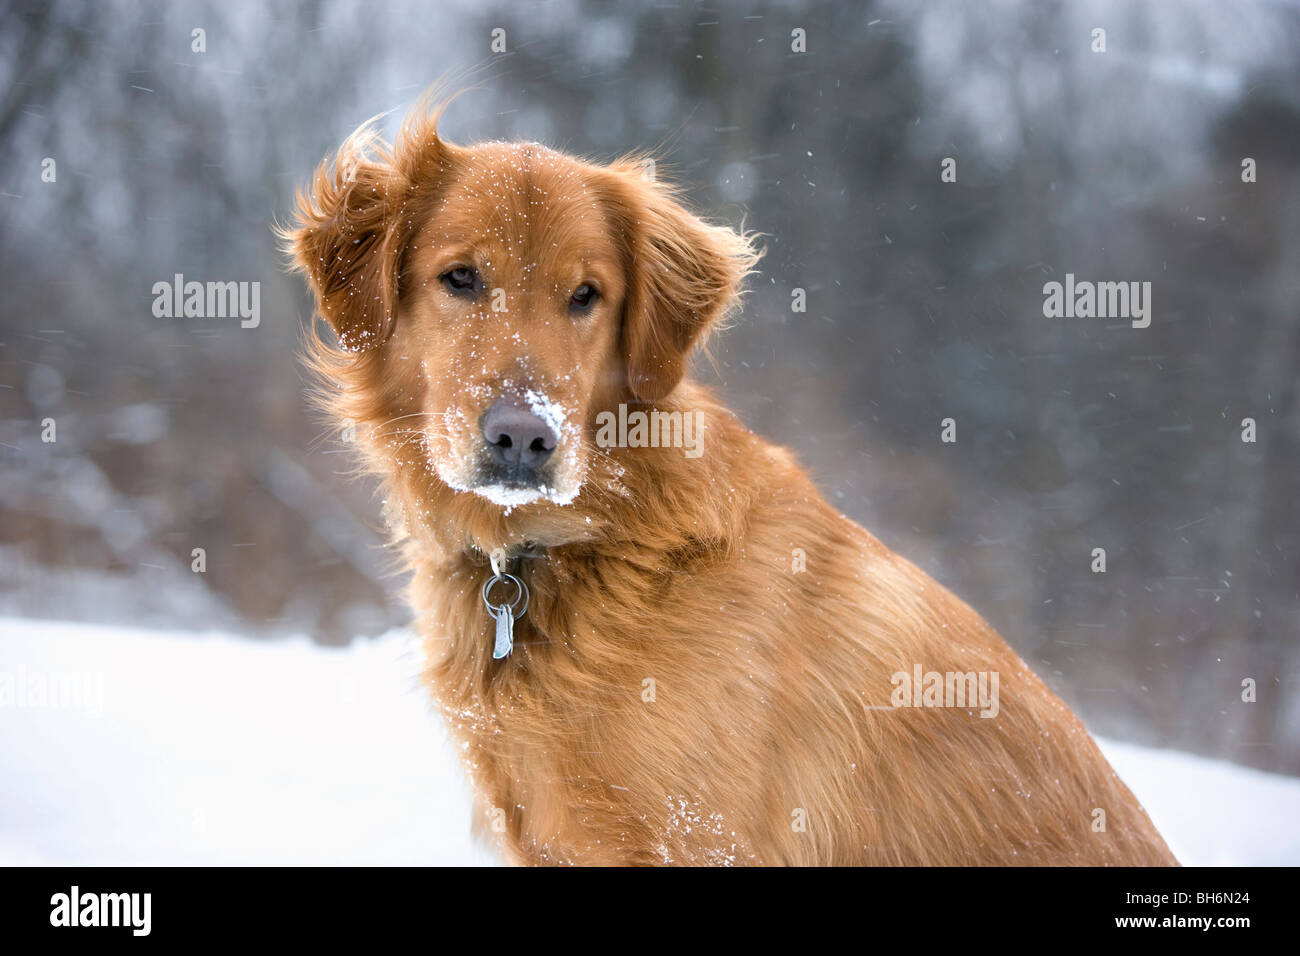 Portrait of handsome and intelligent golden retriever dog posing in a snowy field Stock Photo